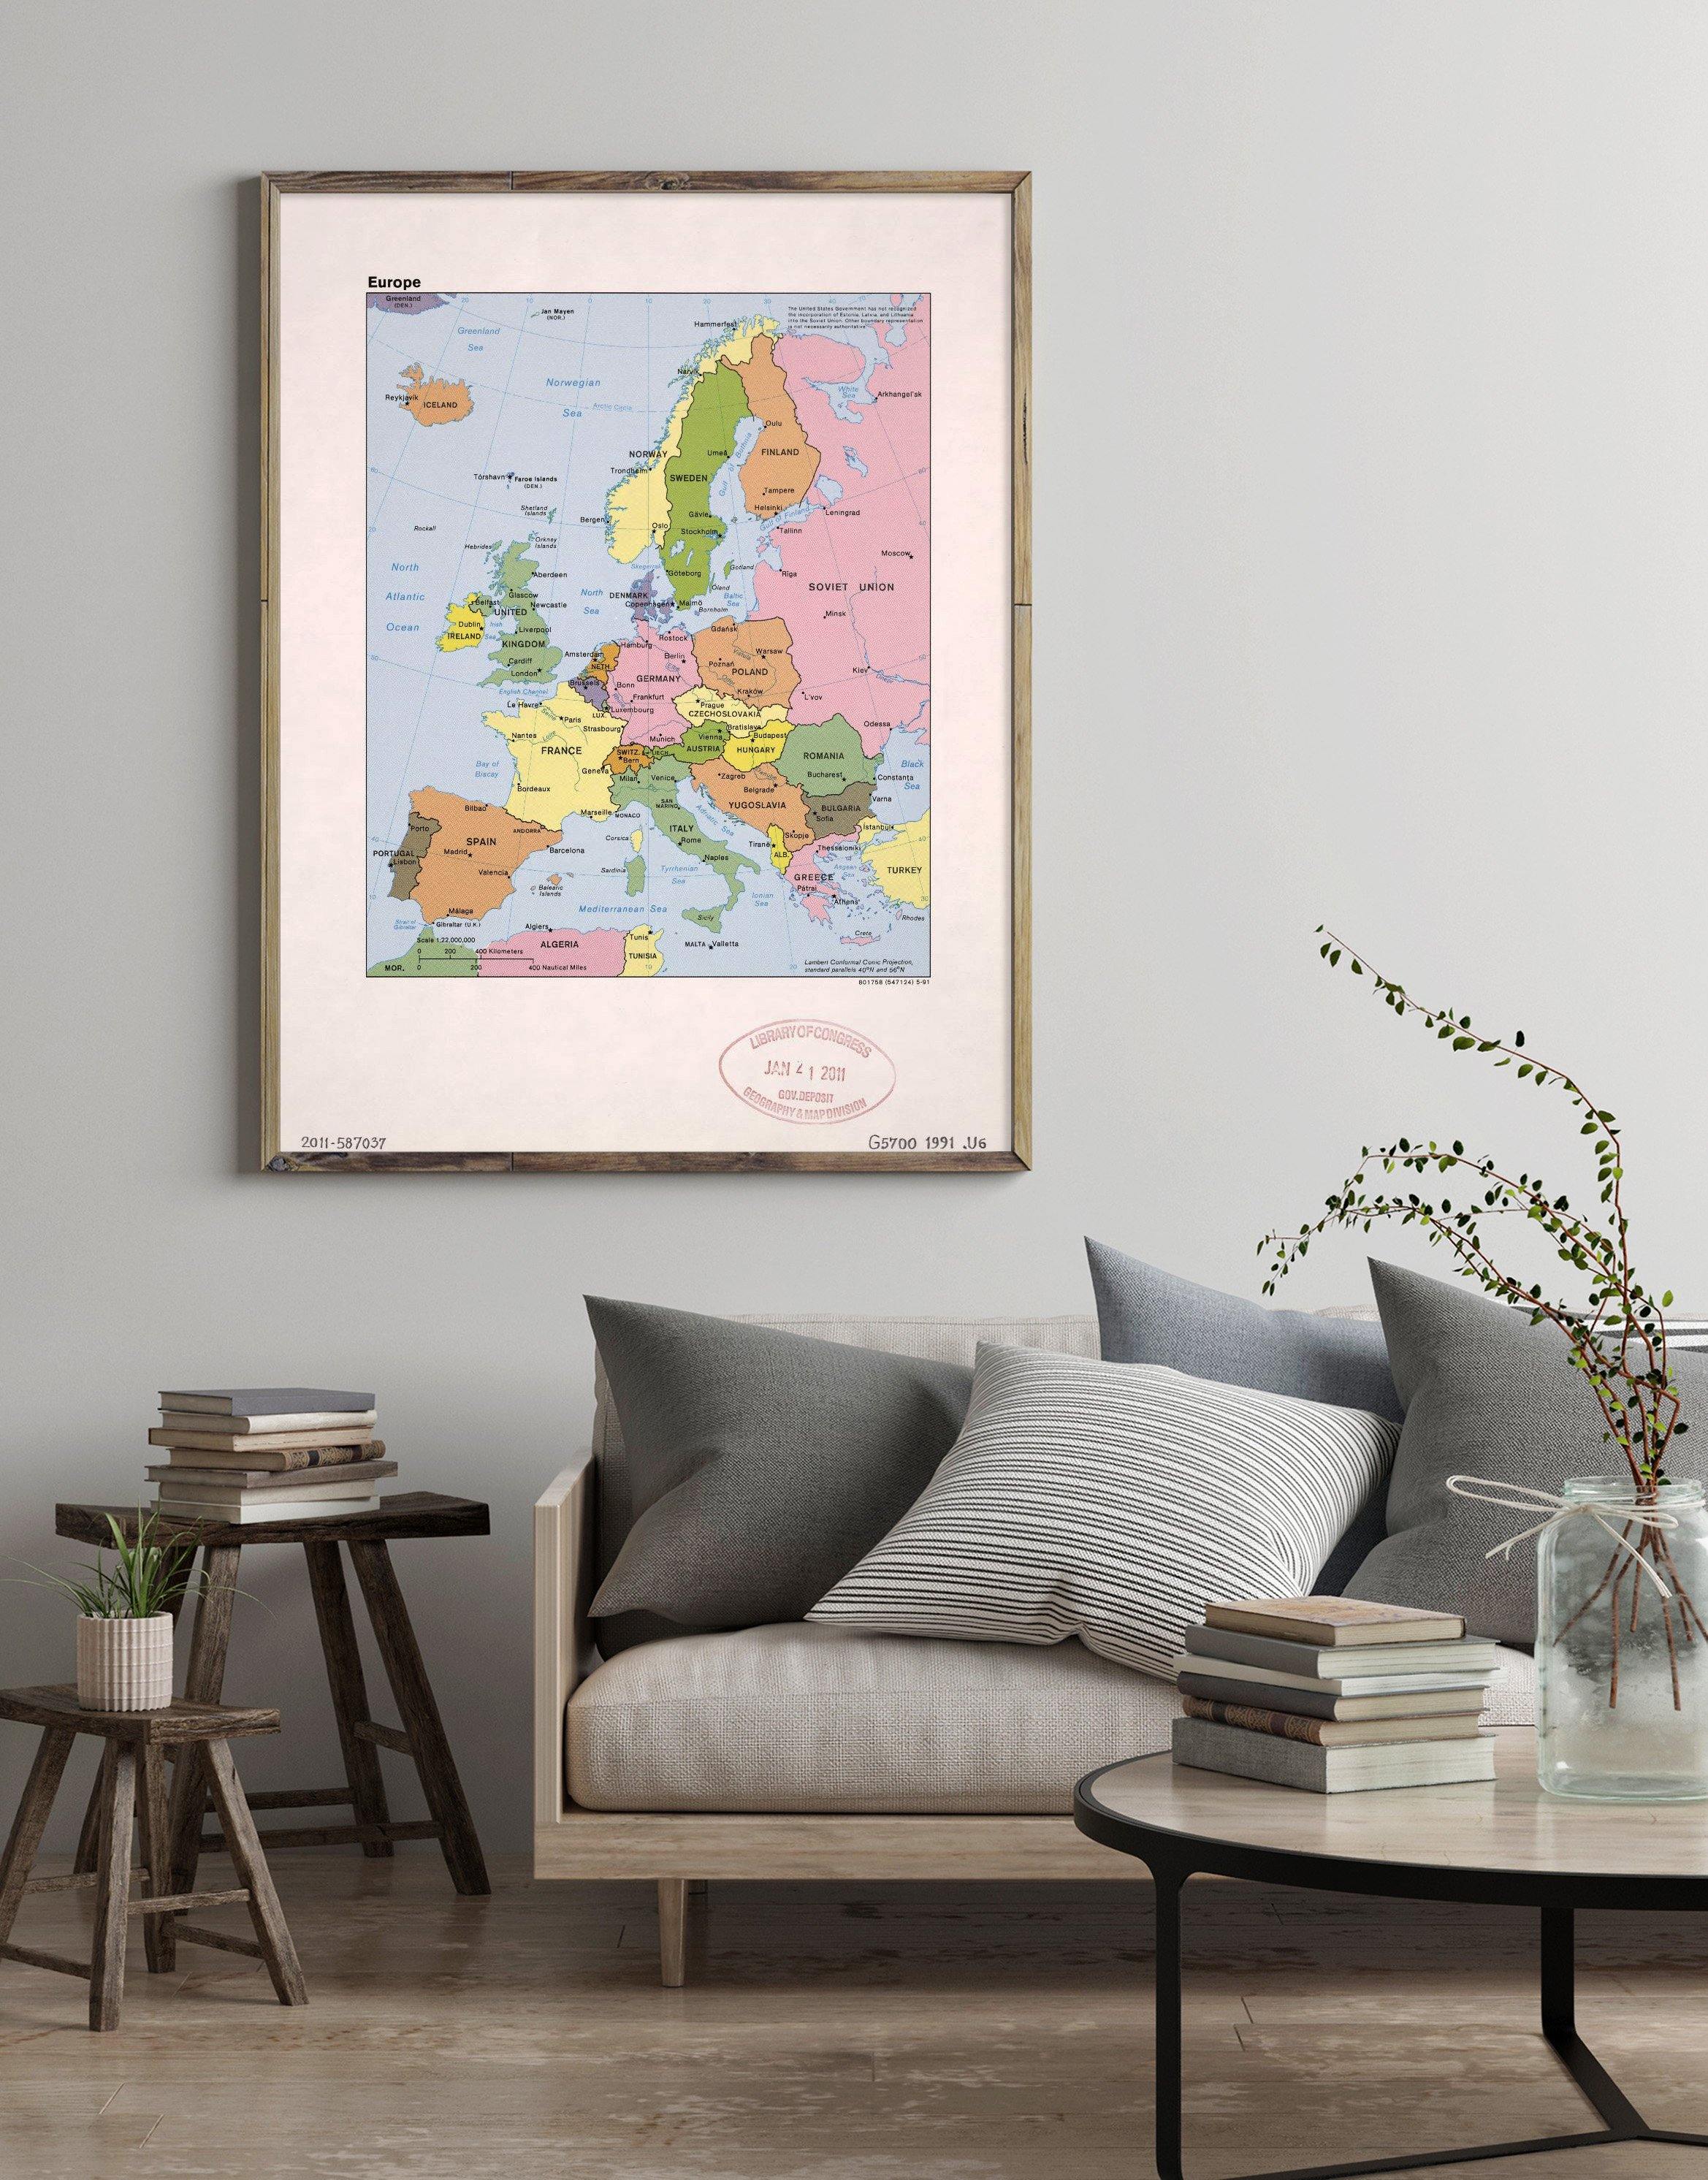 1991 Map| Europe| Europe Map Size: 18 inches x 24 inches |Fits 18x24 s - New York Map Company